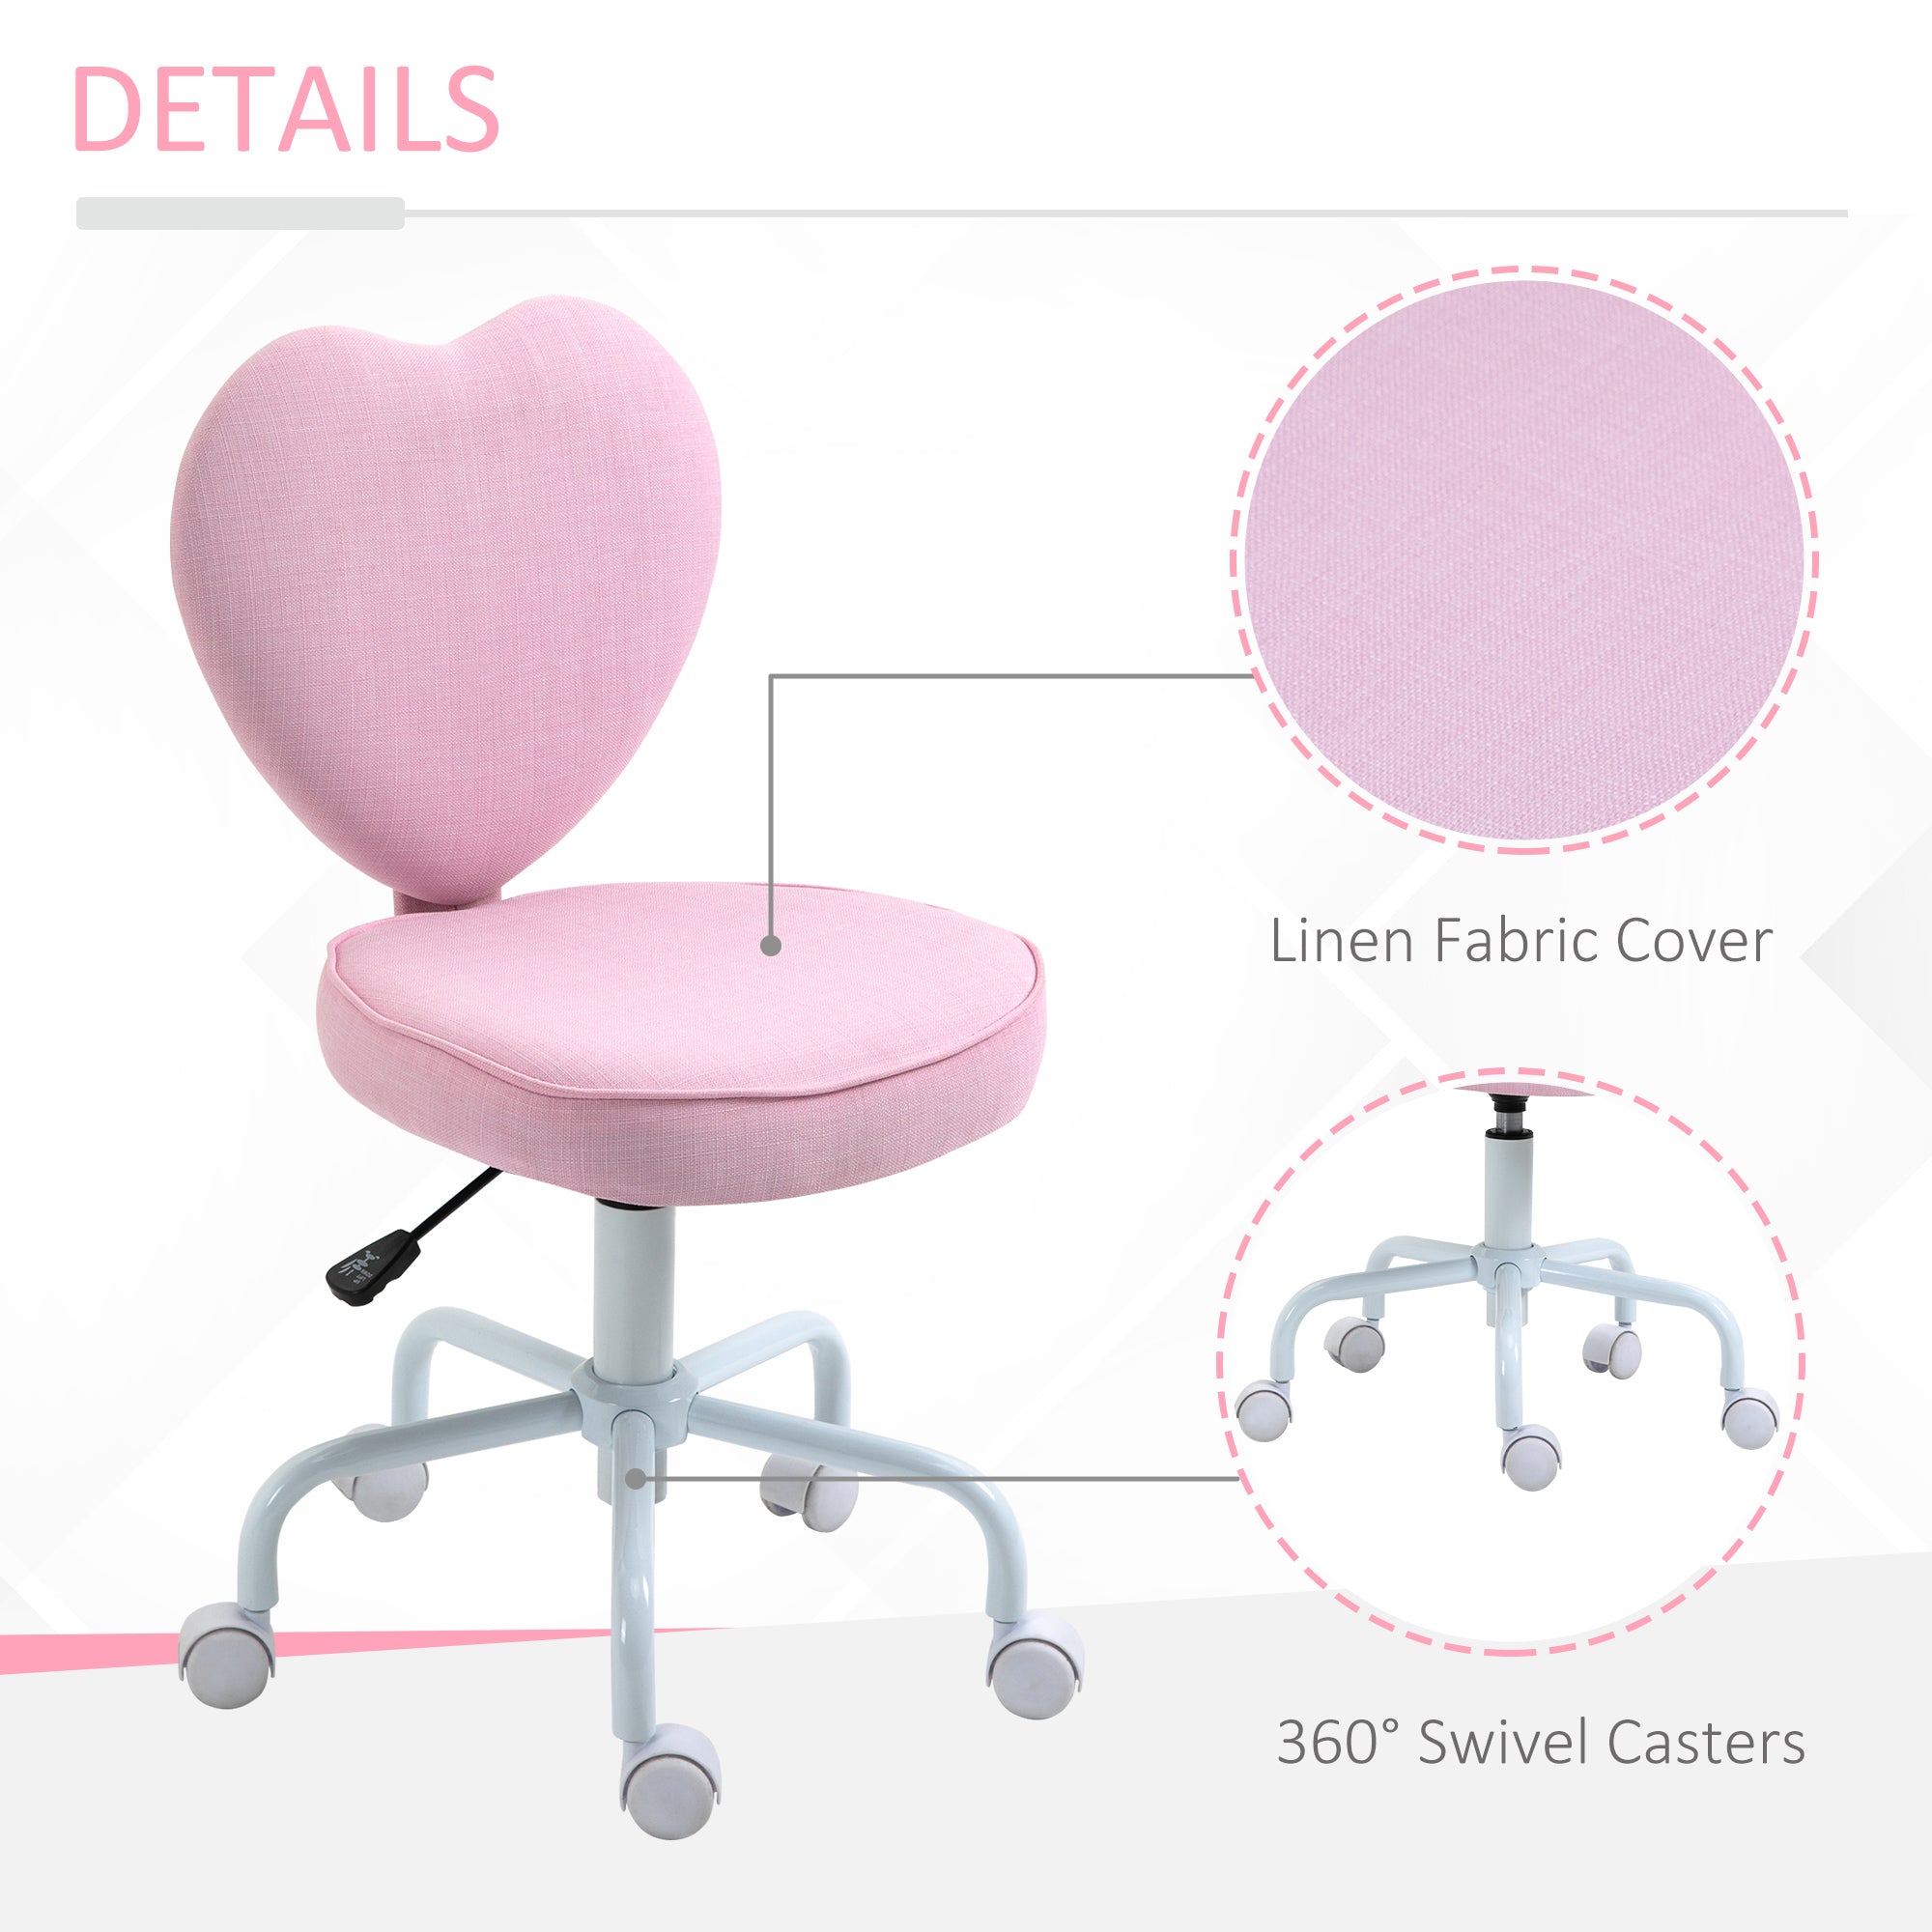 Heart Shaped Back Design Cute Office Chair Pink